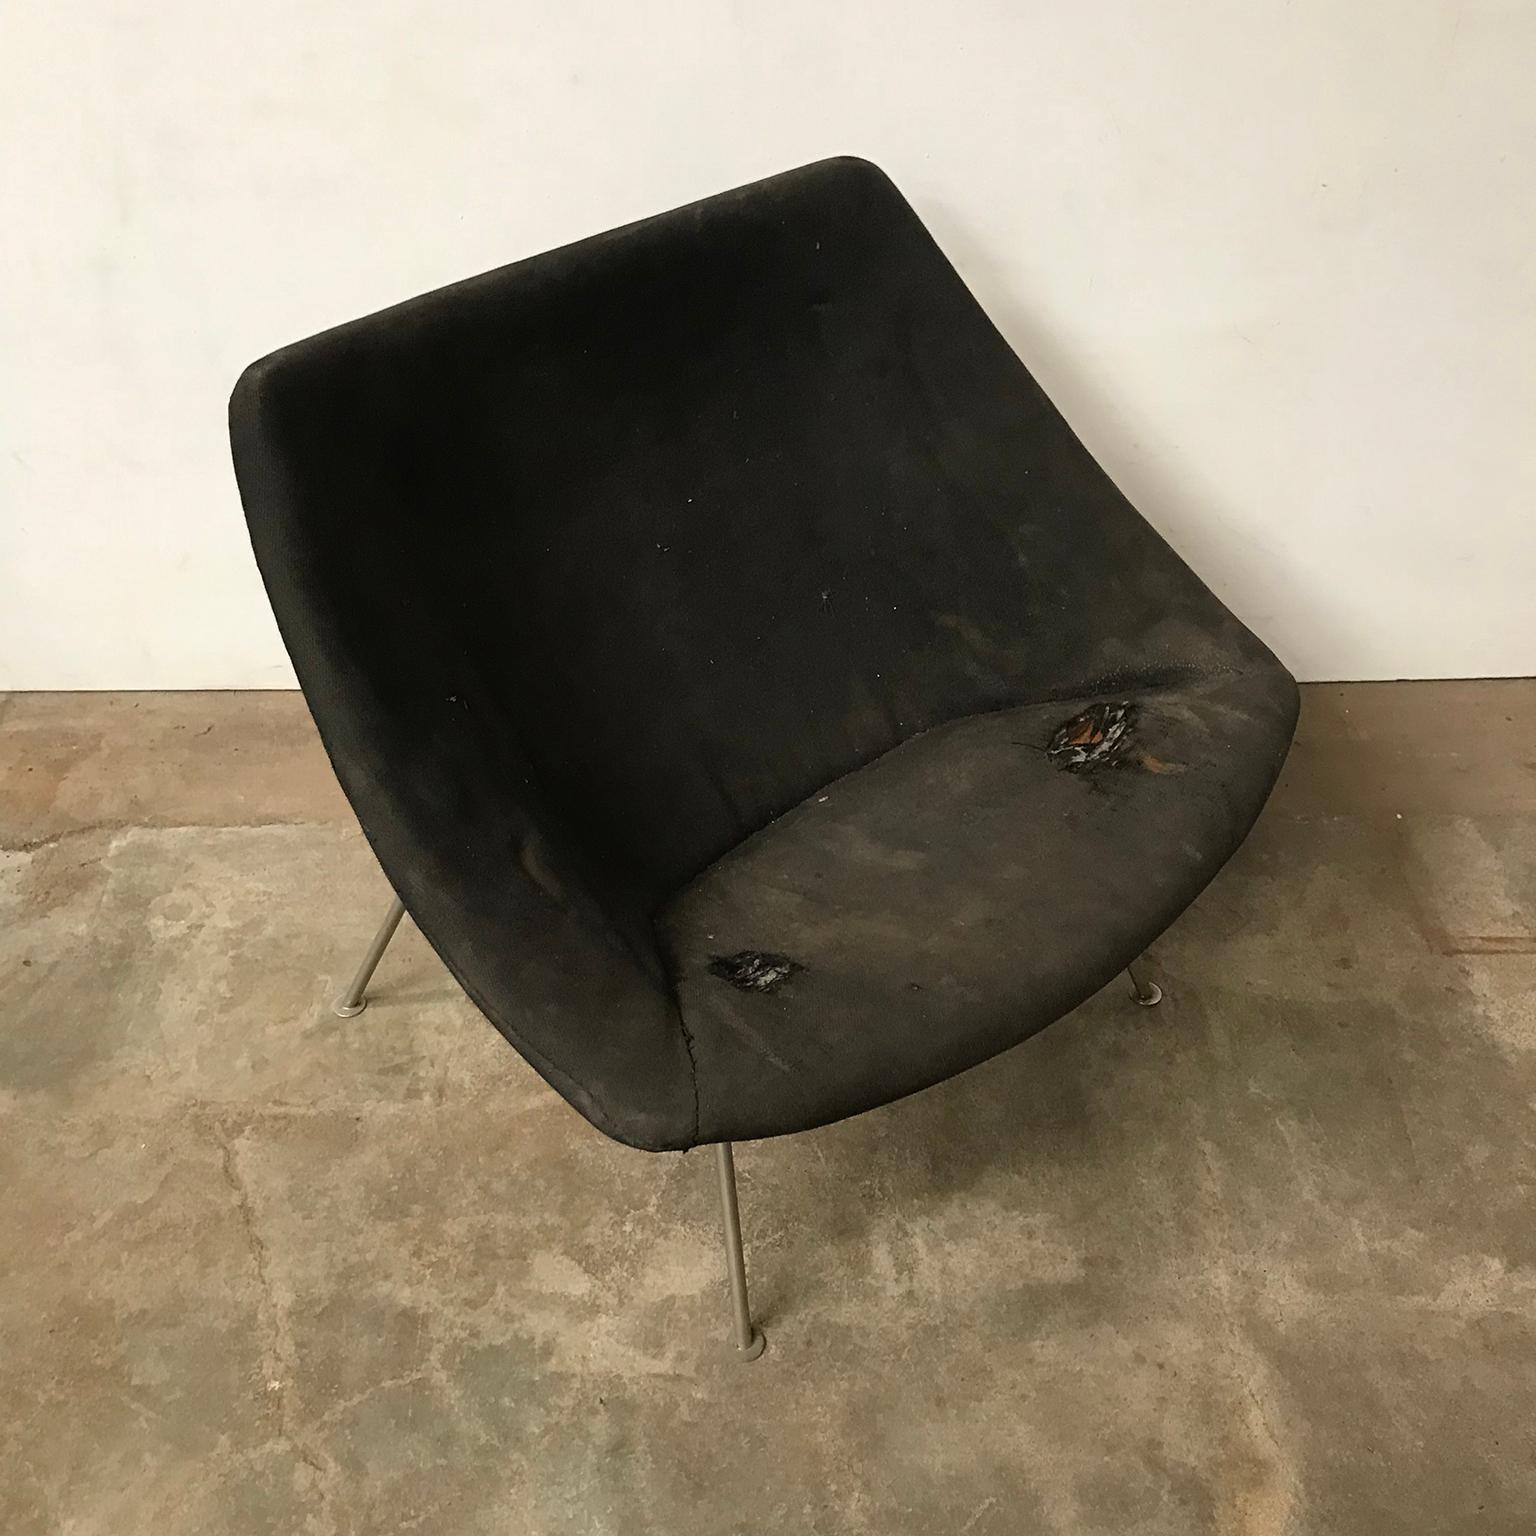 Metal 1959, Pierre Paulin, Large Early Oyster Easy Chair F157 in Original Black Fabric